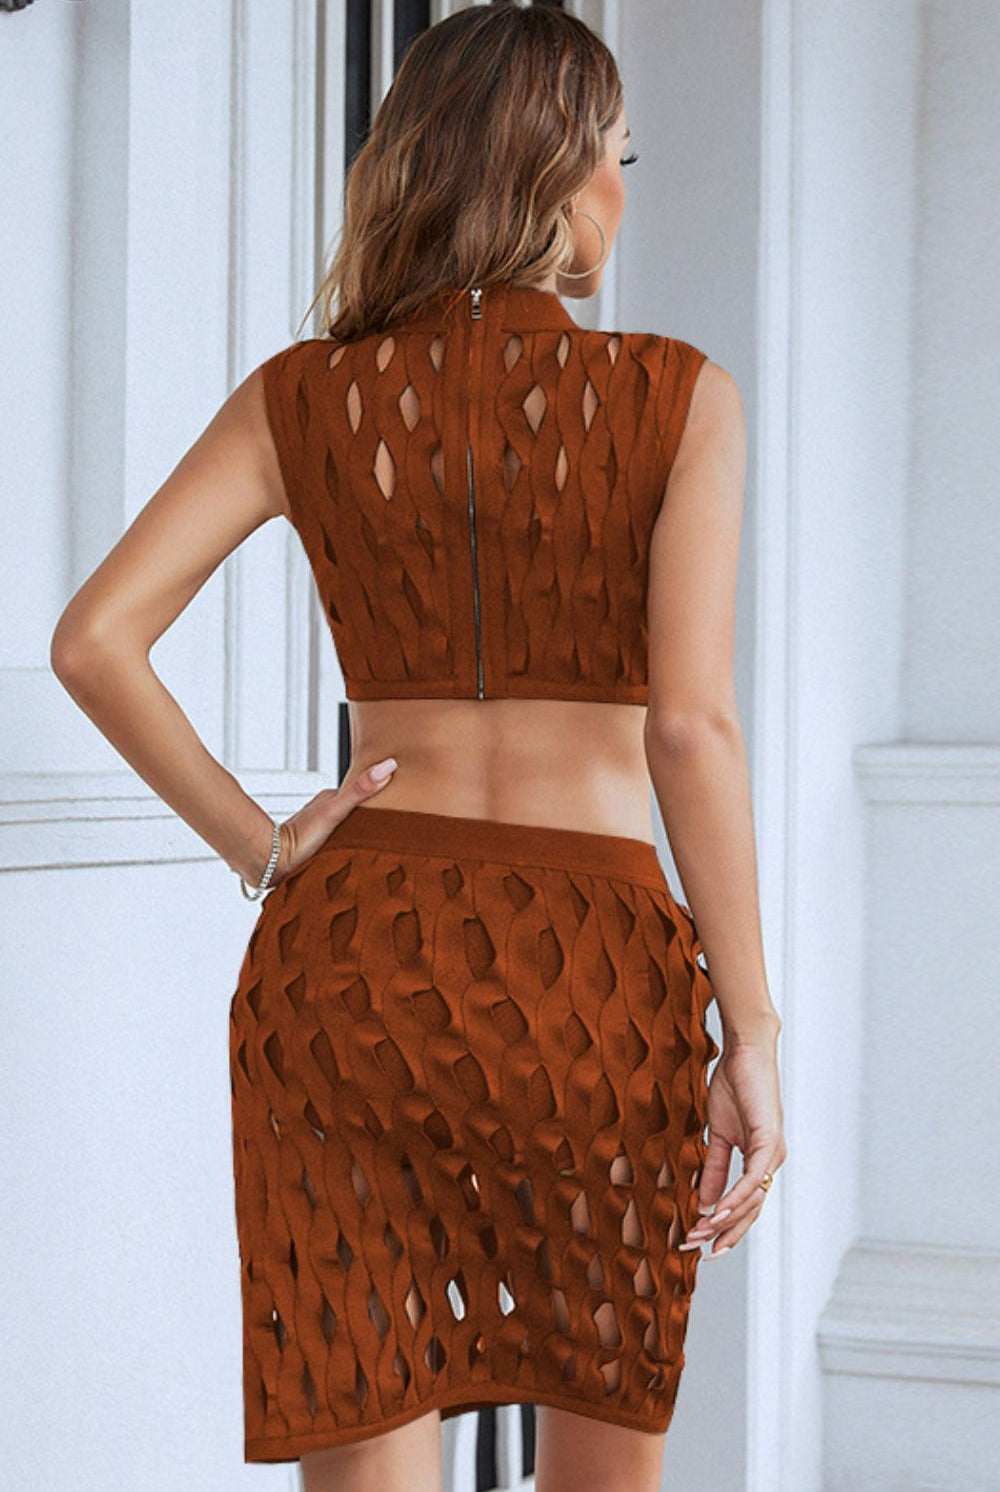 Saddle Brown Openwork Cropped Top and Skirt Set Outfit Sets